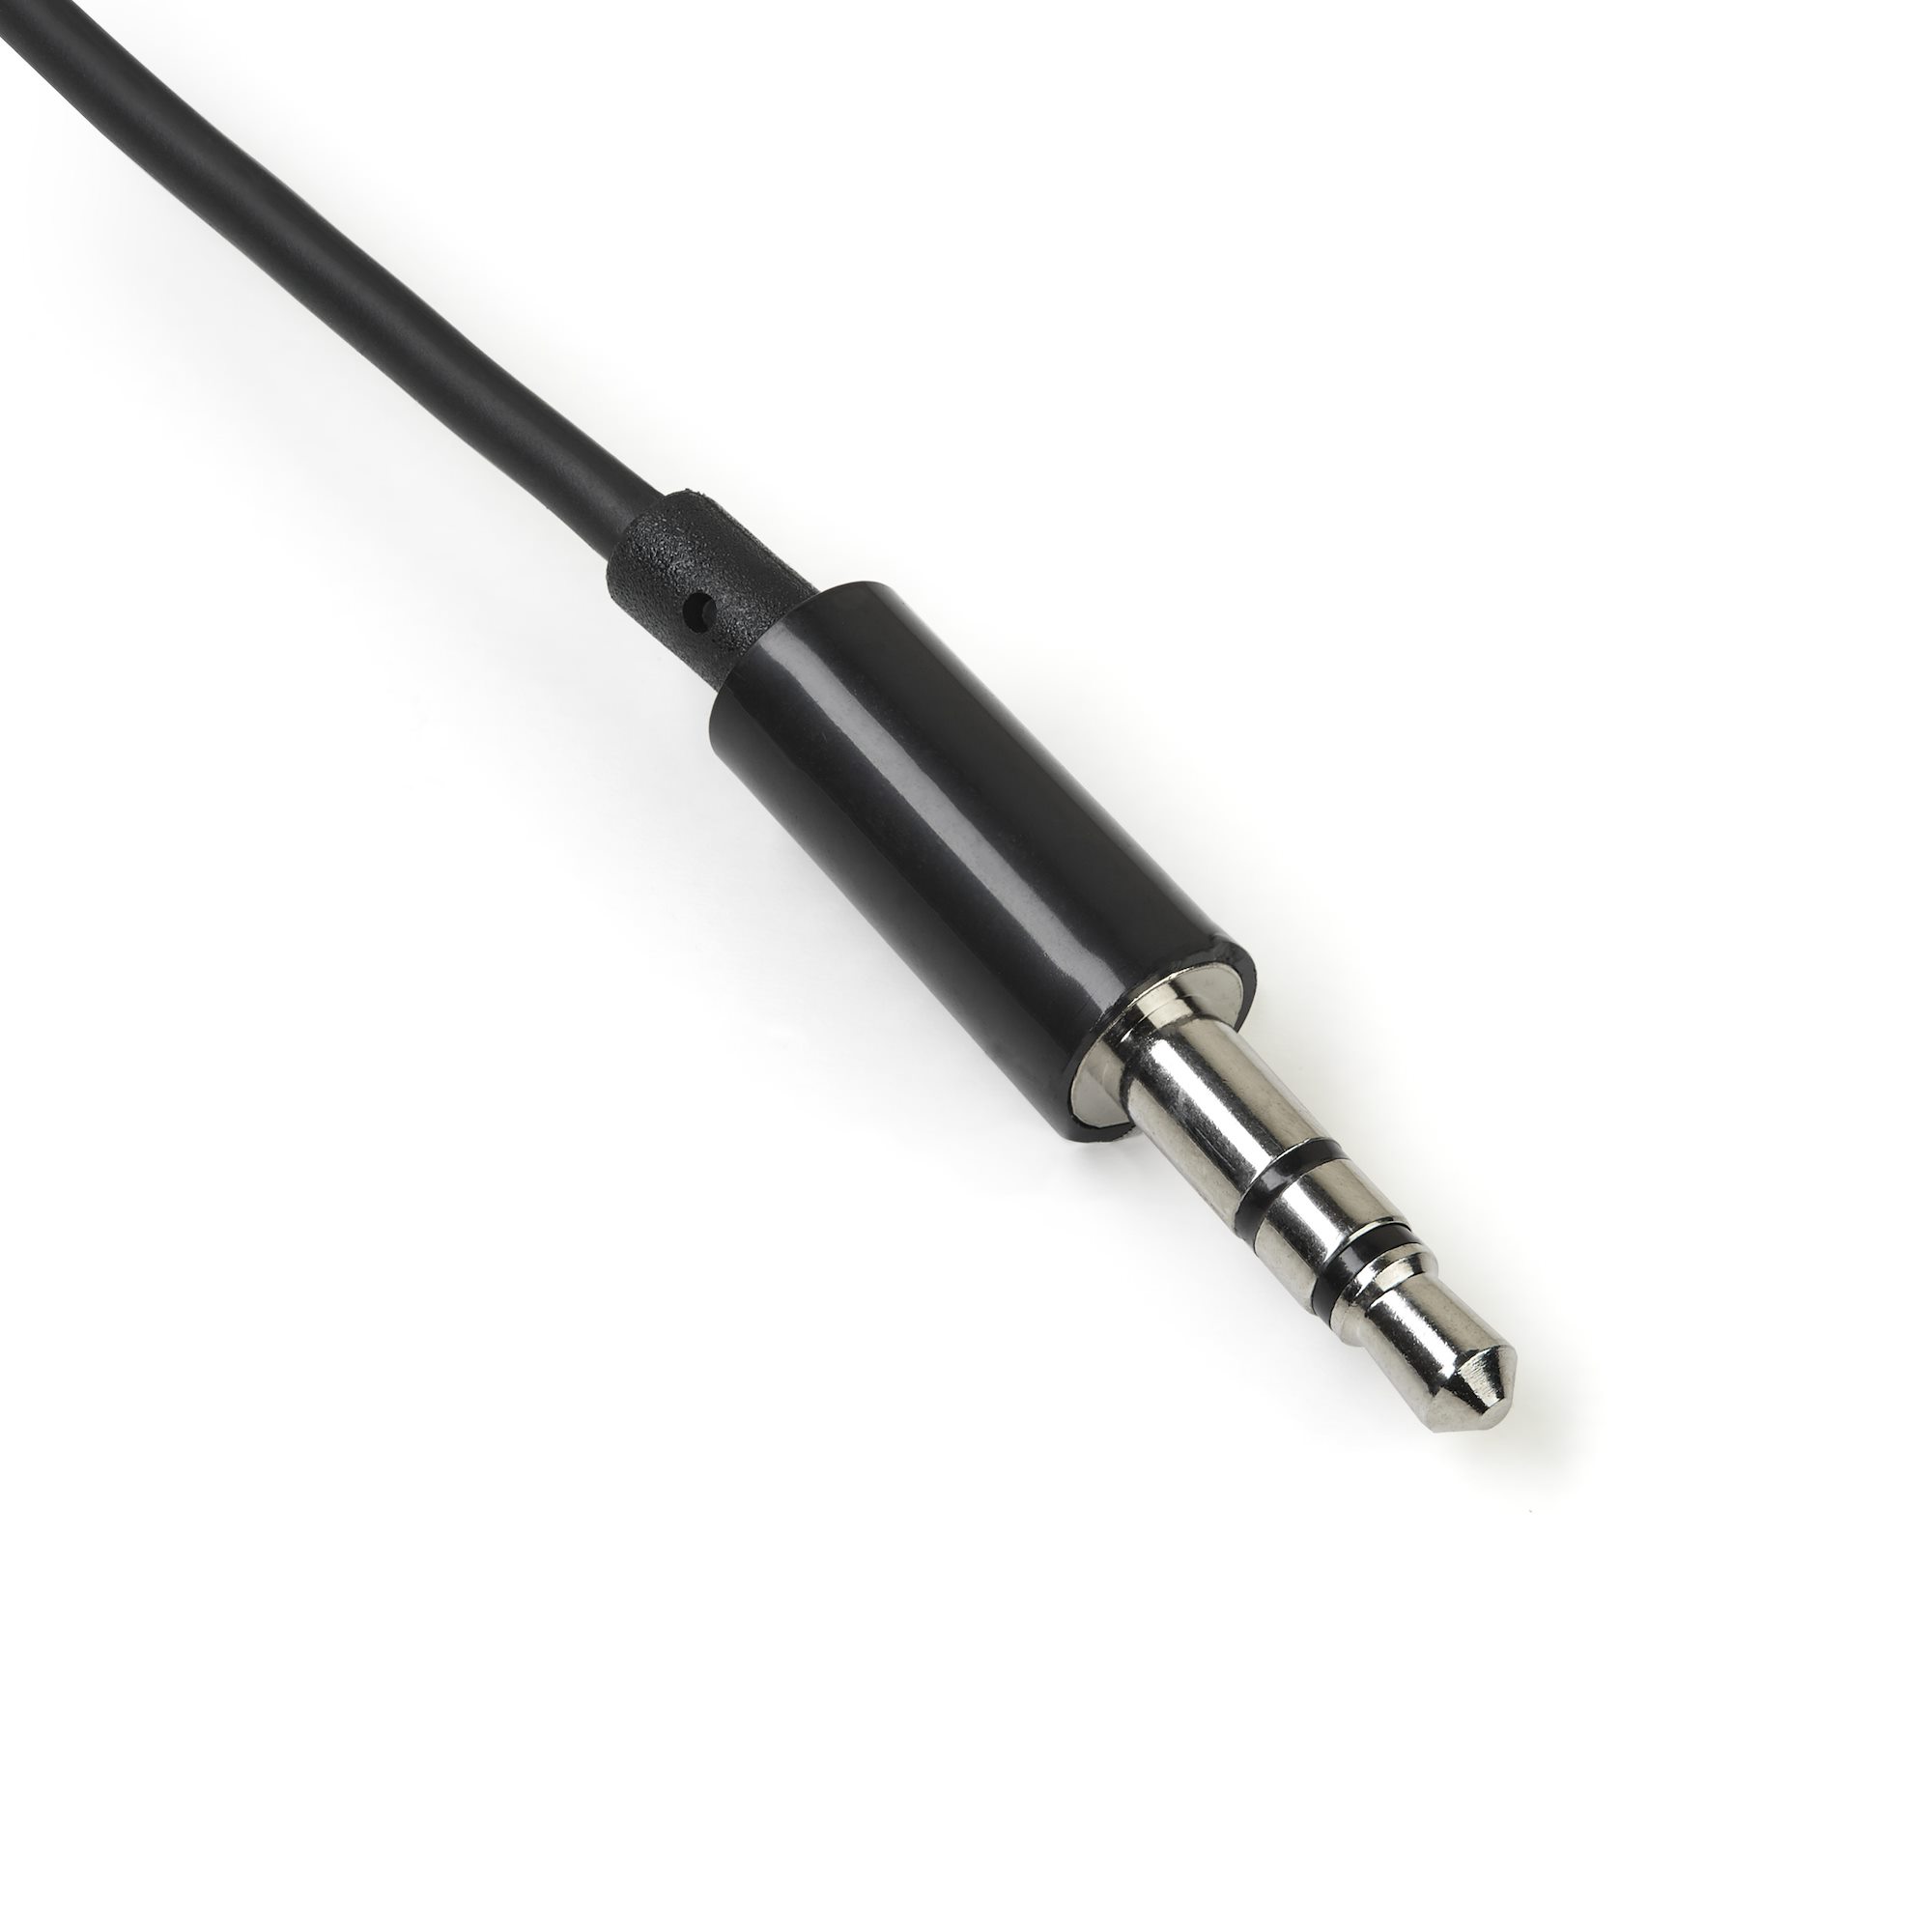 Slim Mini Jack Splitter Cable Adapter - Audio Cables and Adapters